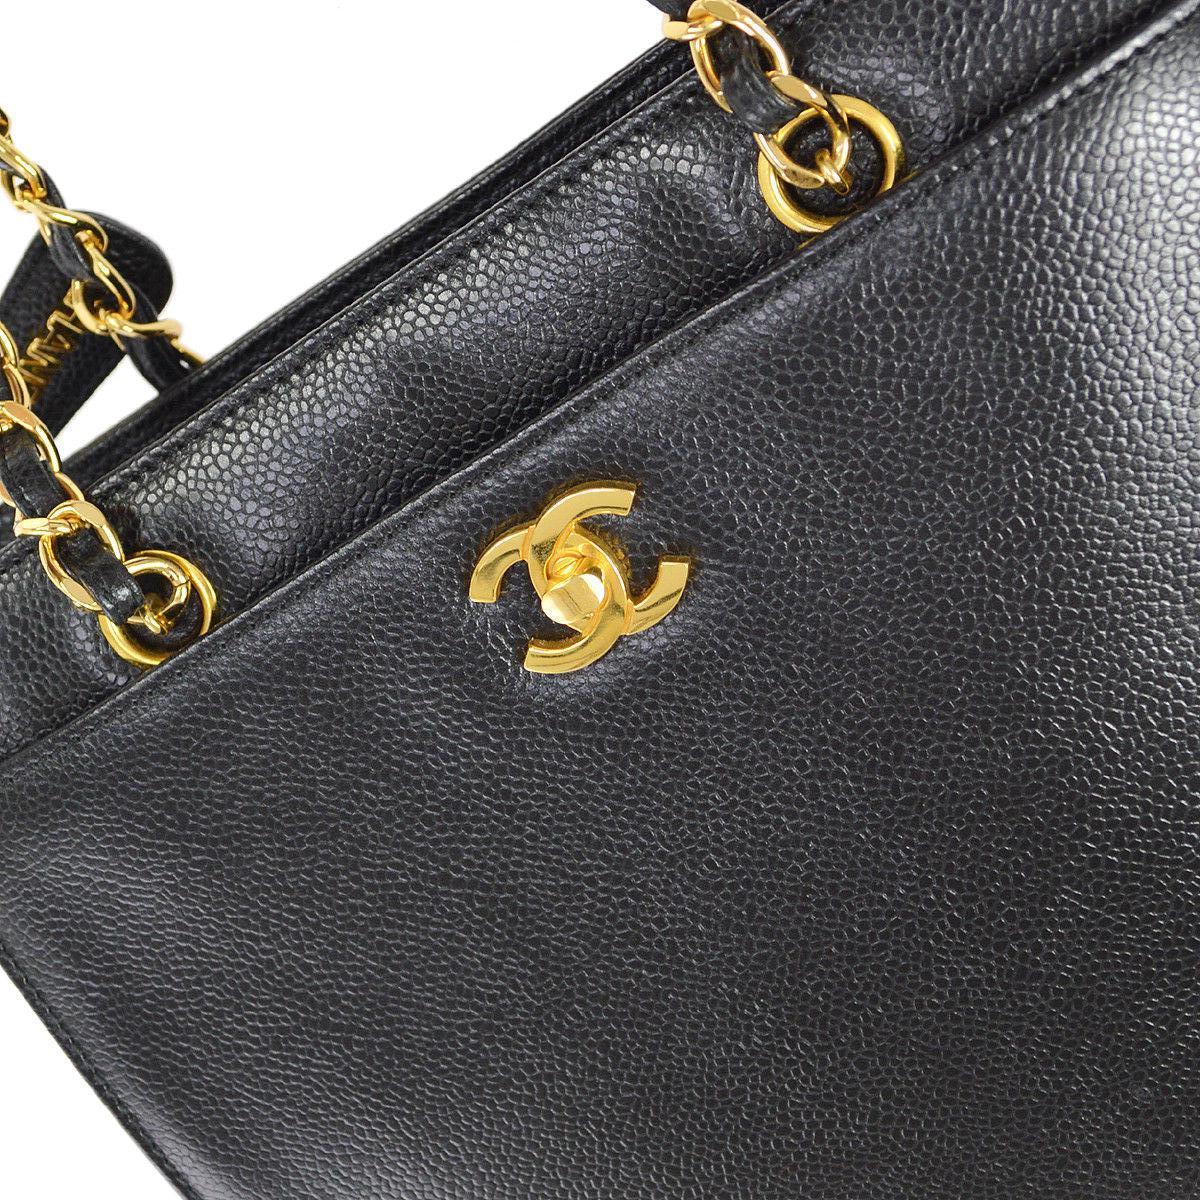 Chanel Black Caviar Leather Zip Carryall Travel Shopper Shoulder Tote Bag

Caviar leather
Gold tone hardware
Woven lining
Zipper closure
Date code present
Made in France
Measures 
Handle drop 6.75